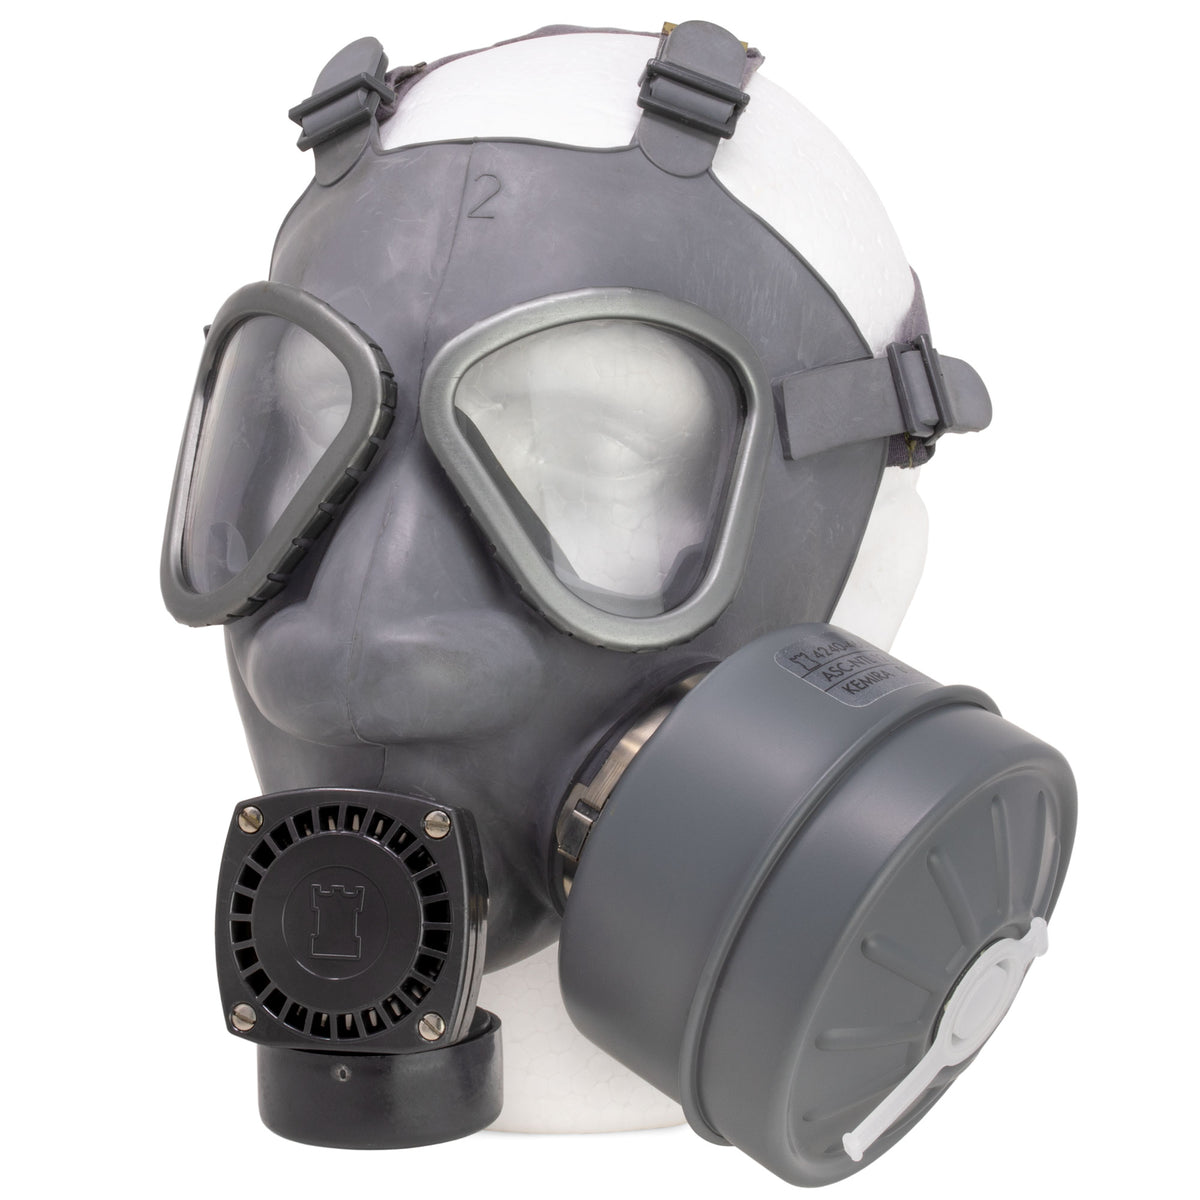 Finnish Army Gas Mask & Filter